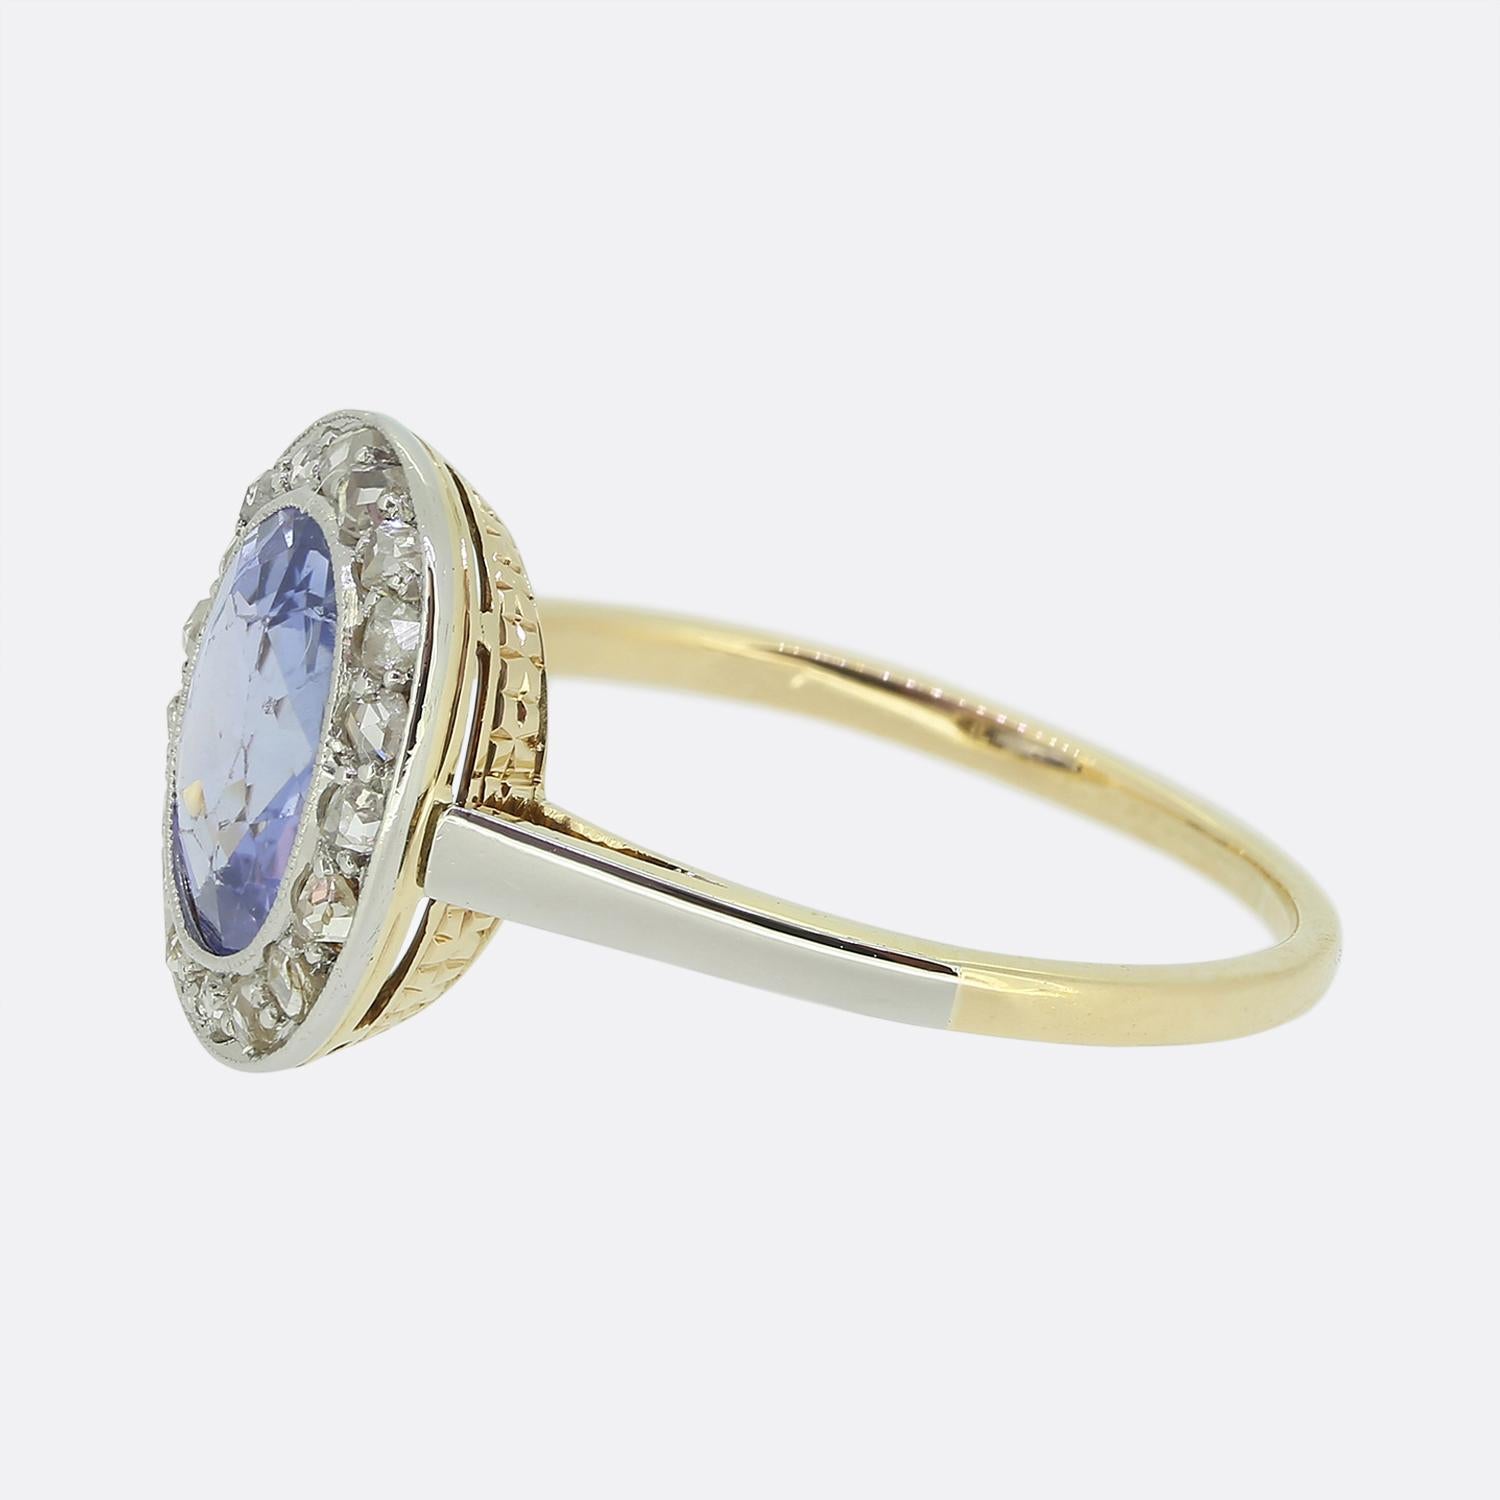 Here we have a beautiful sapphire and diamond halo ring taken from the Edwardian period. At the centre we find a captivating 1.50ct oval faceted sapphire possessing a medium light blue colour tone. This radiant principal stone is then surrounded by